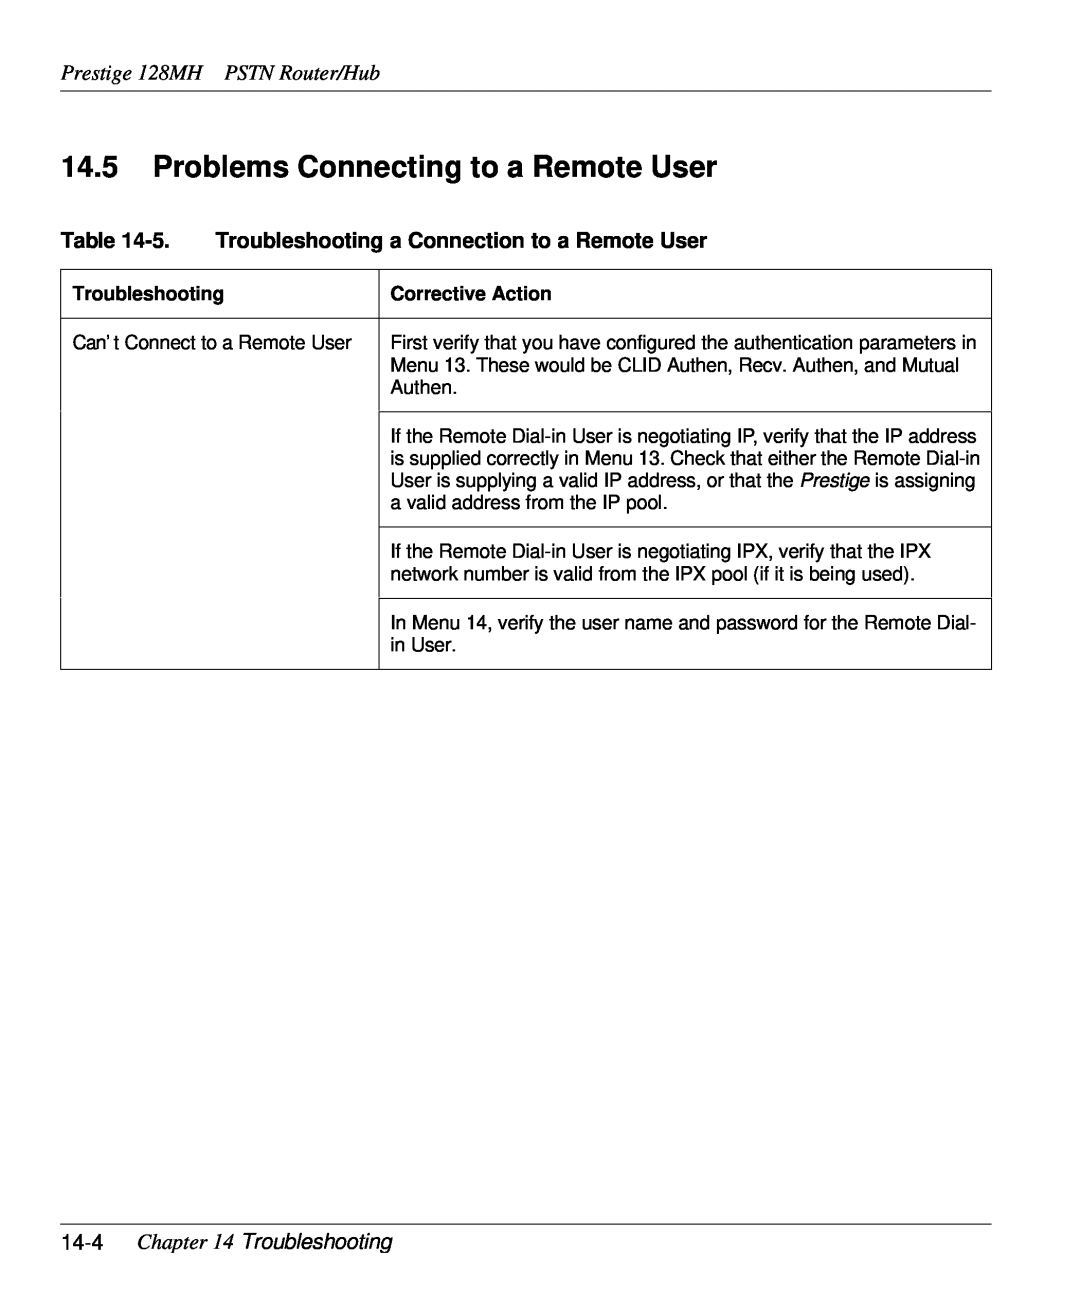 ZyXEL Communications user manual Problems Connecting to a Remote User, Prestige 128MH PSTN Router/Hub, Troubleshooting 